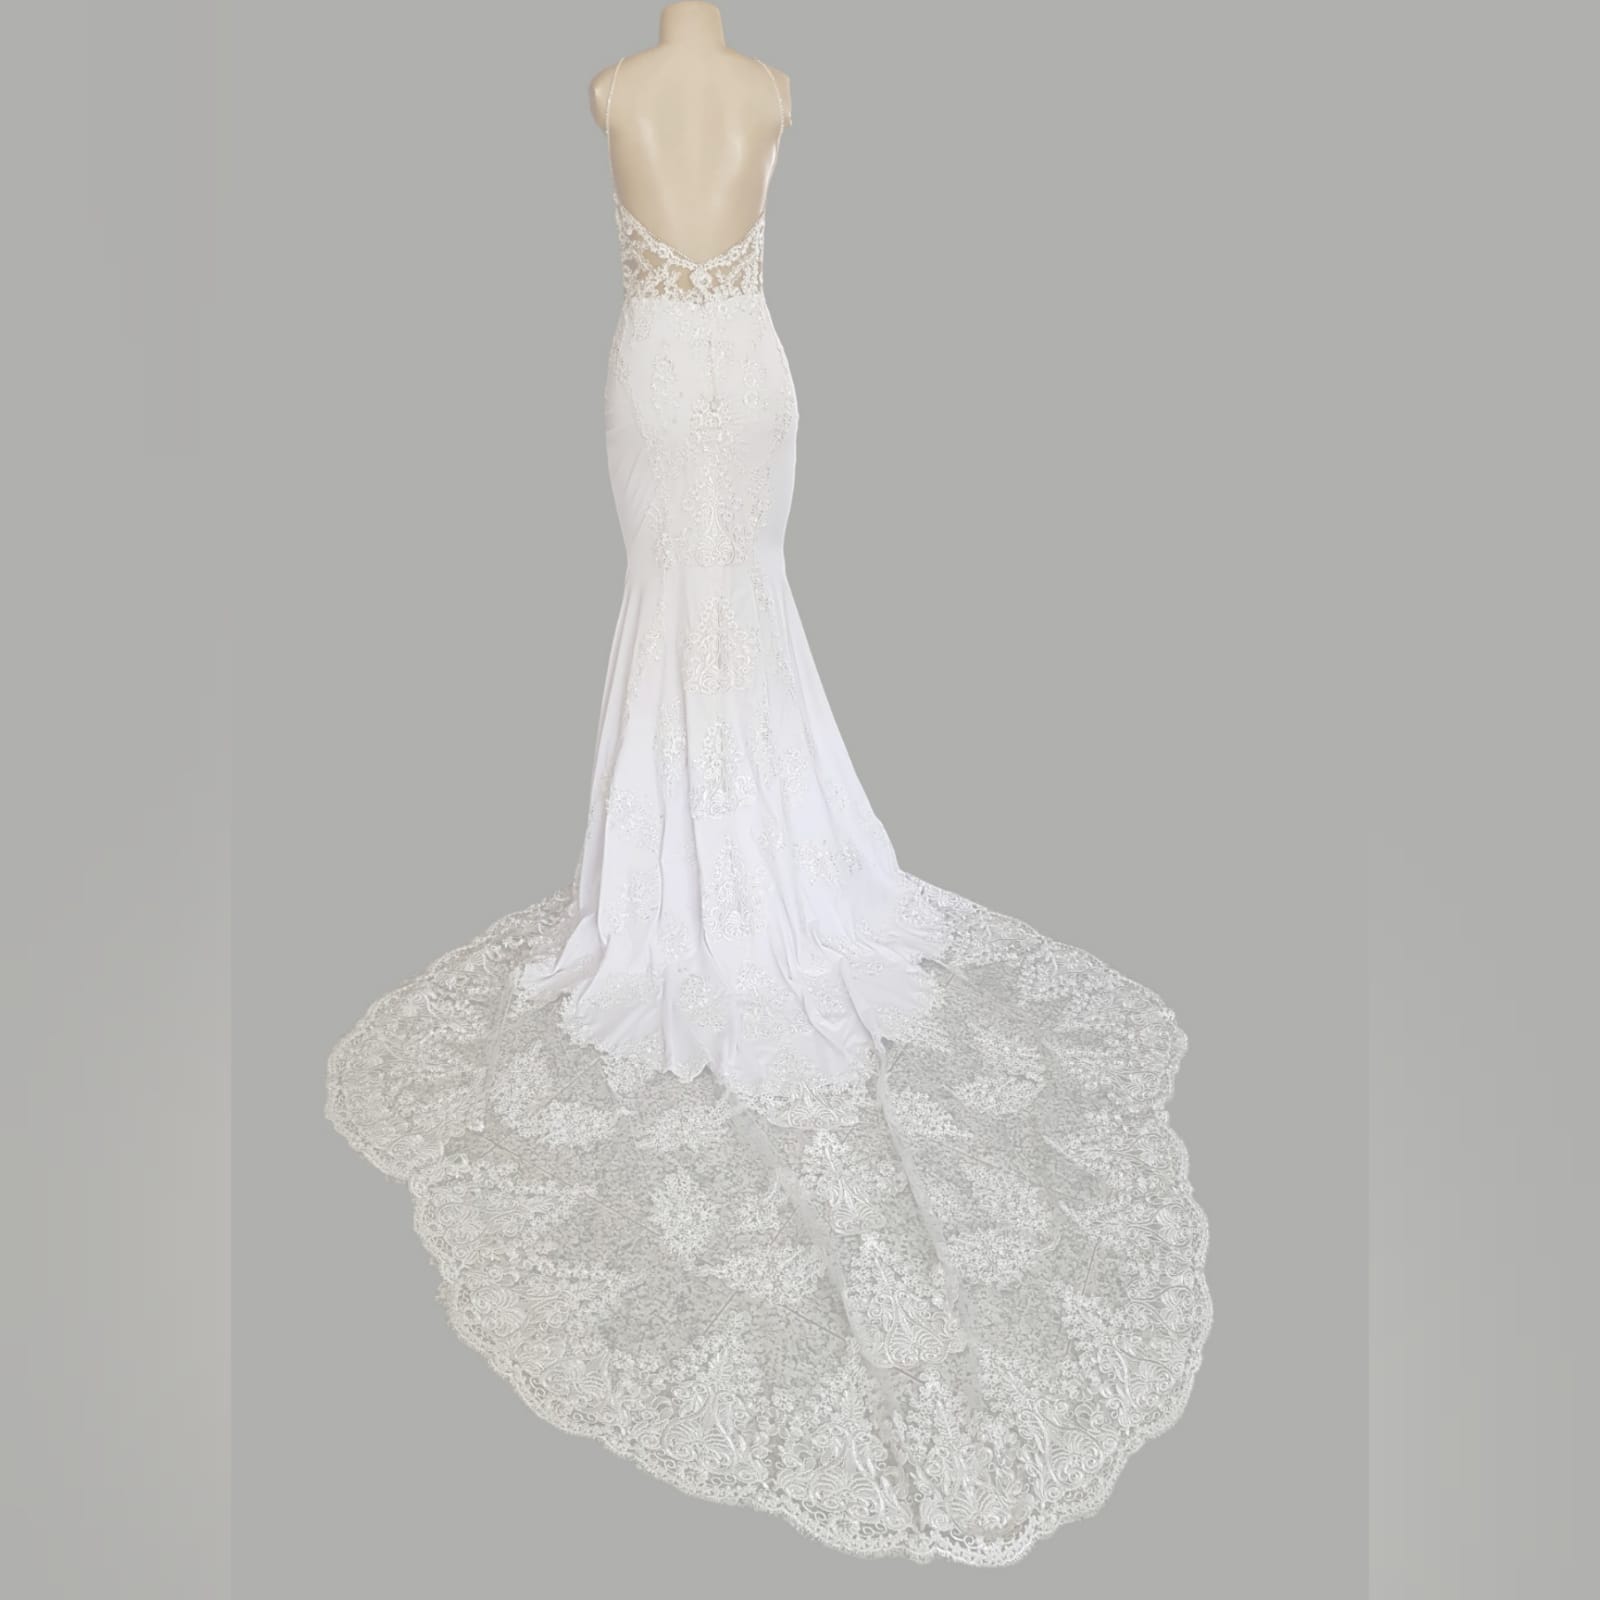 White lace mermaid wedding dress with lace train 13 white lace mermaid wedding dress, lace bodice with a v neckline, low open back and thin shoulder straps detailed with diamante. Lace from the waist down, creating a long sheer lace train. With a train hookup and a matching garter.